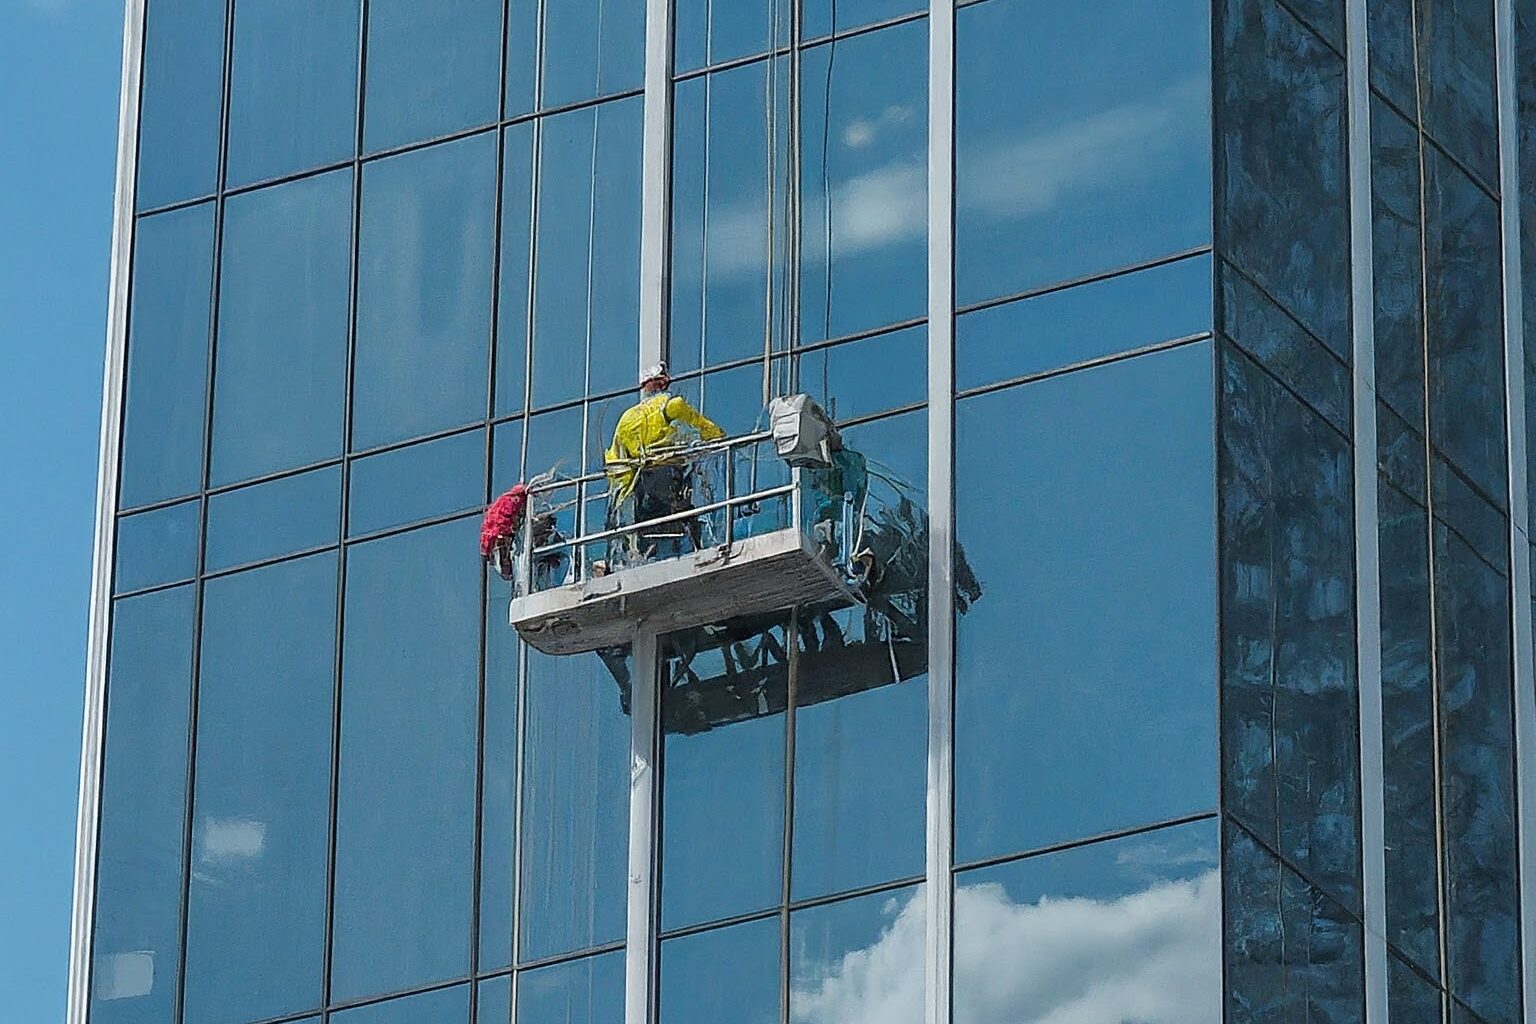 A man cleaning the windows of a high-rise building using a safety harness and squeegee.